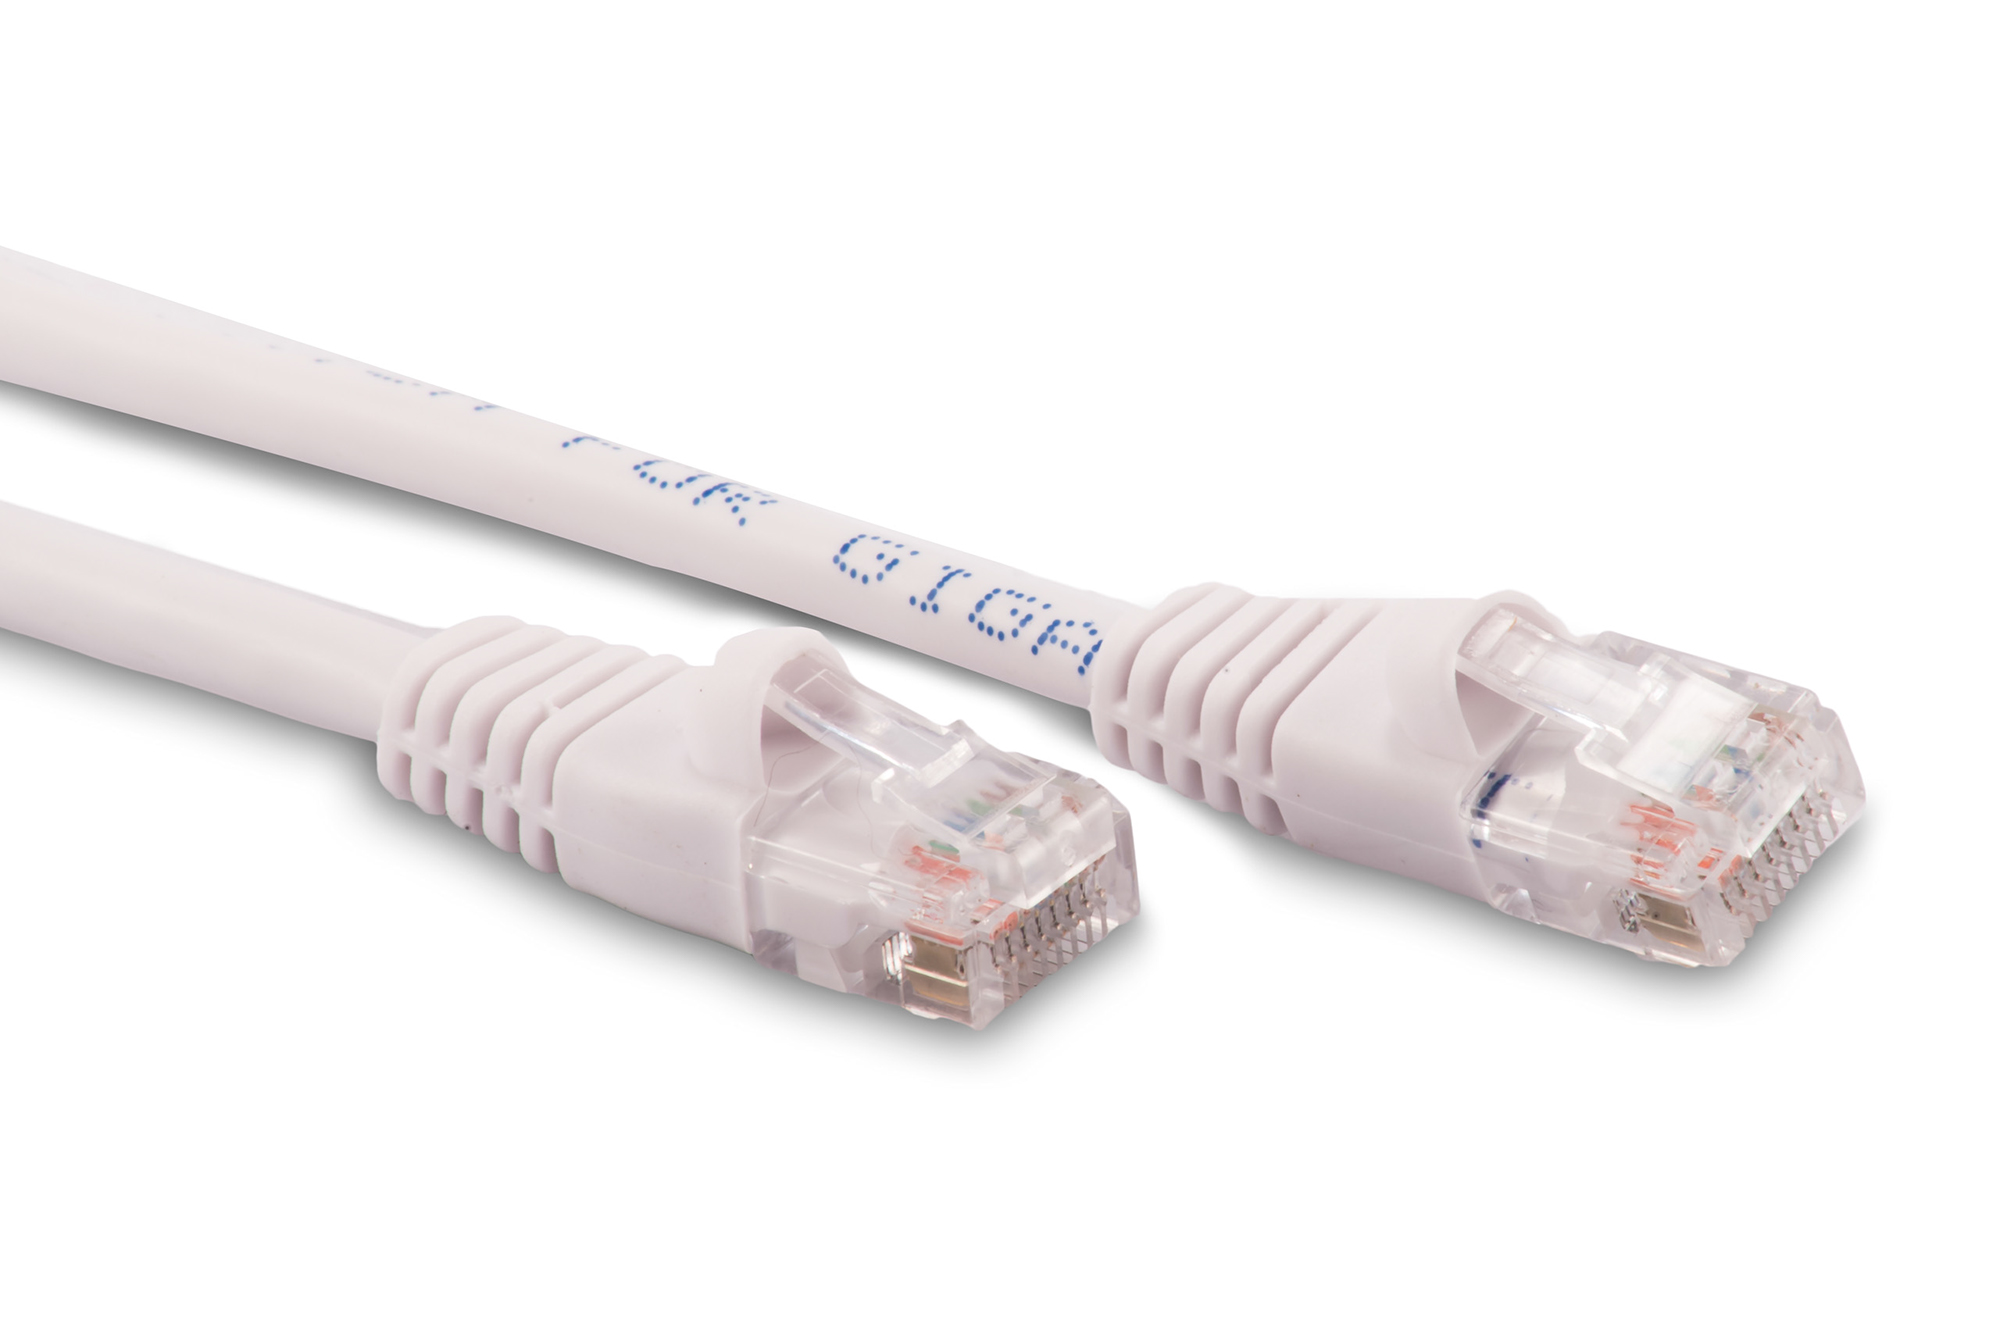 0.5ft Cat6 Ethernet Patch Cable - White Color - Snagless Boot